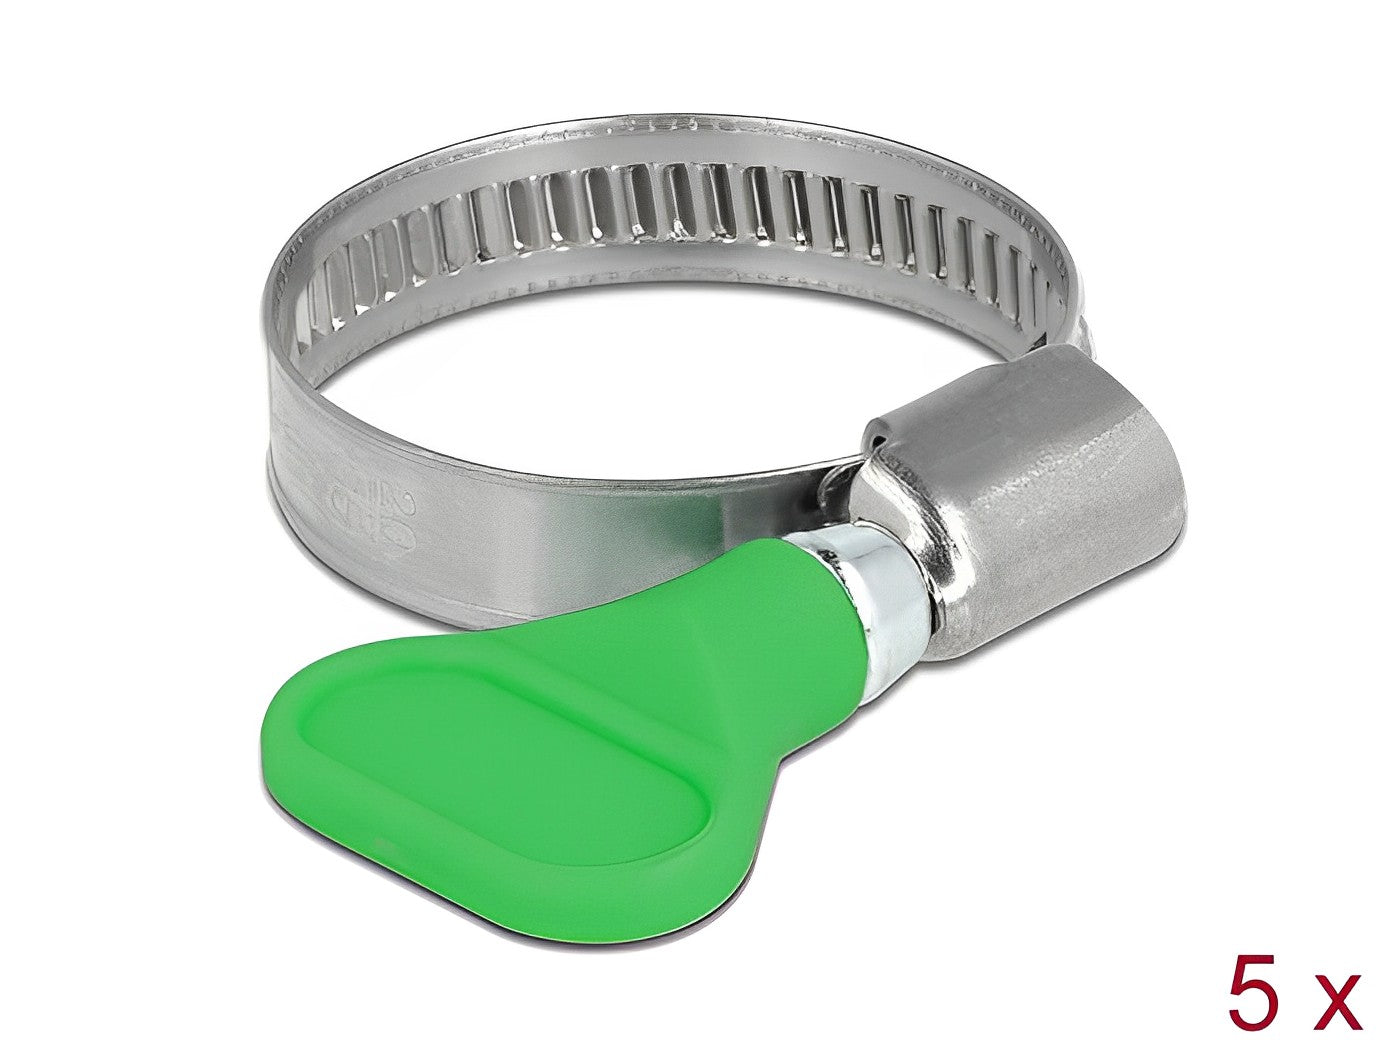 Delock Butterfly Hose Clamp stainless steel 400 SS 20 - 35 mm 5 pieces green - delock.israel